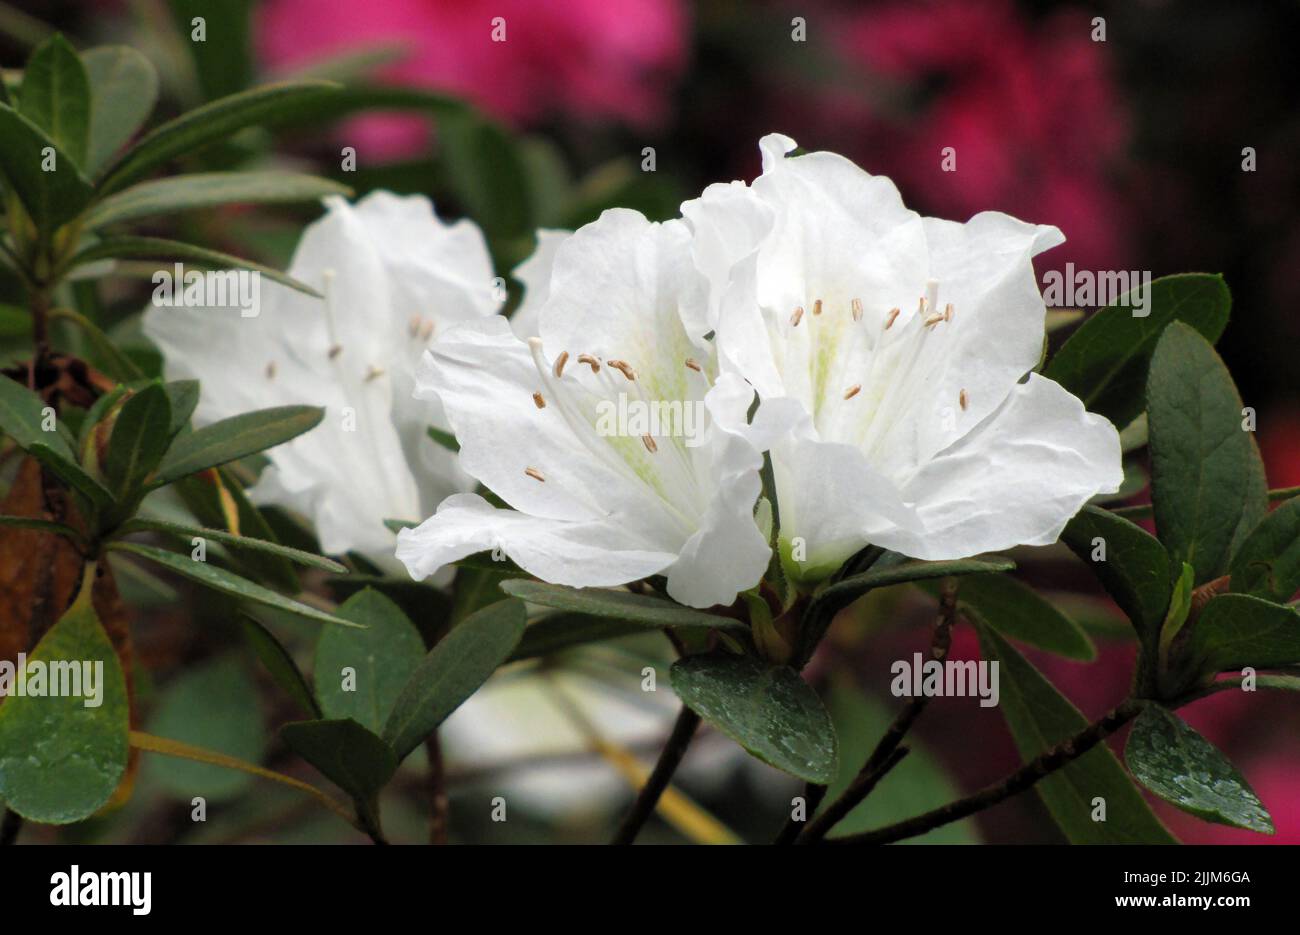 Flowers of Rhododendron white (Cunningham's White) close-up very delicate and beautiful Stock Photo